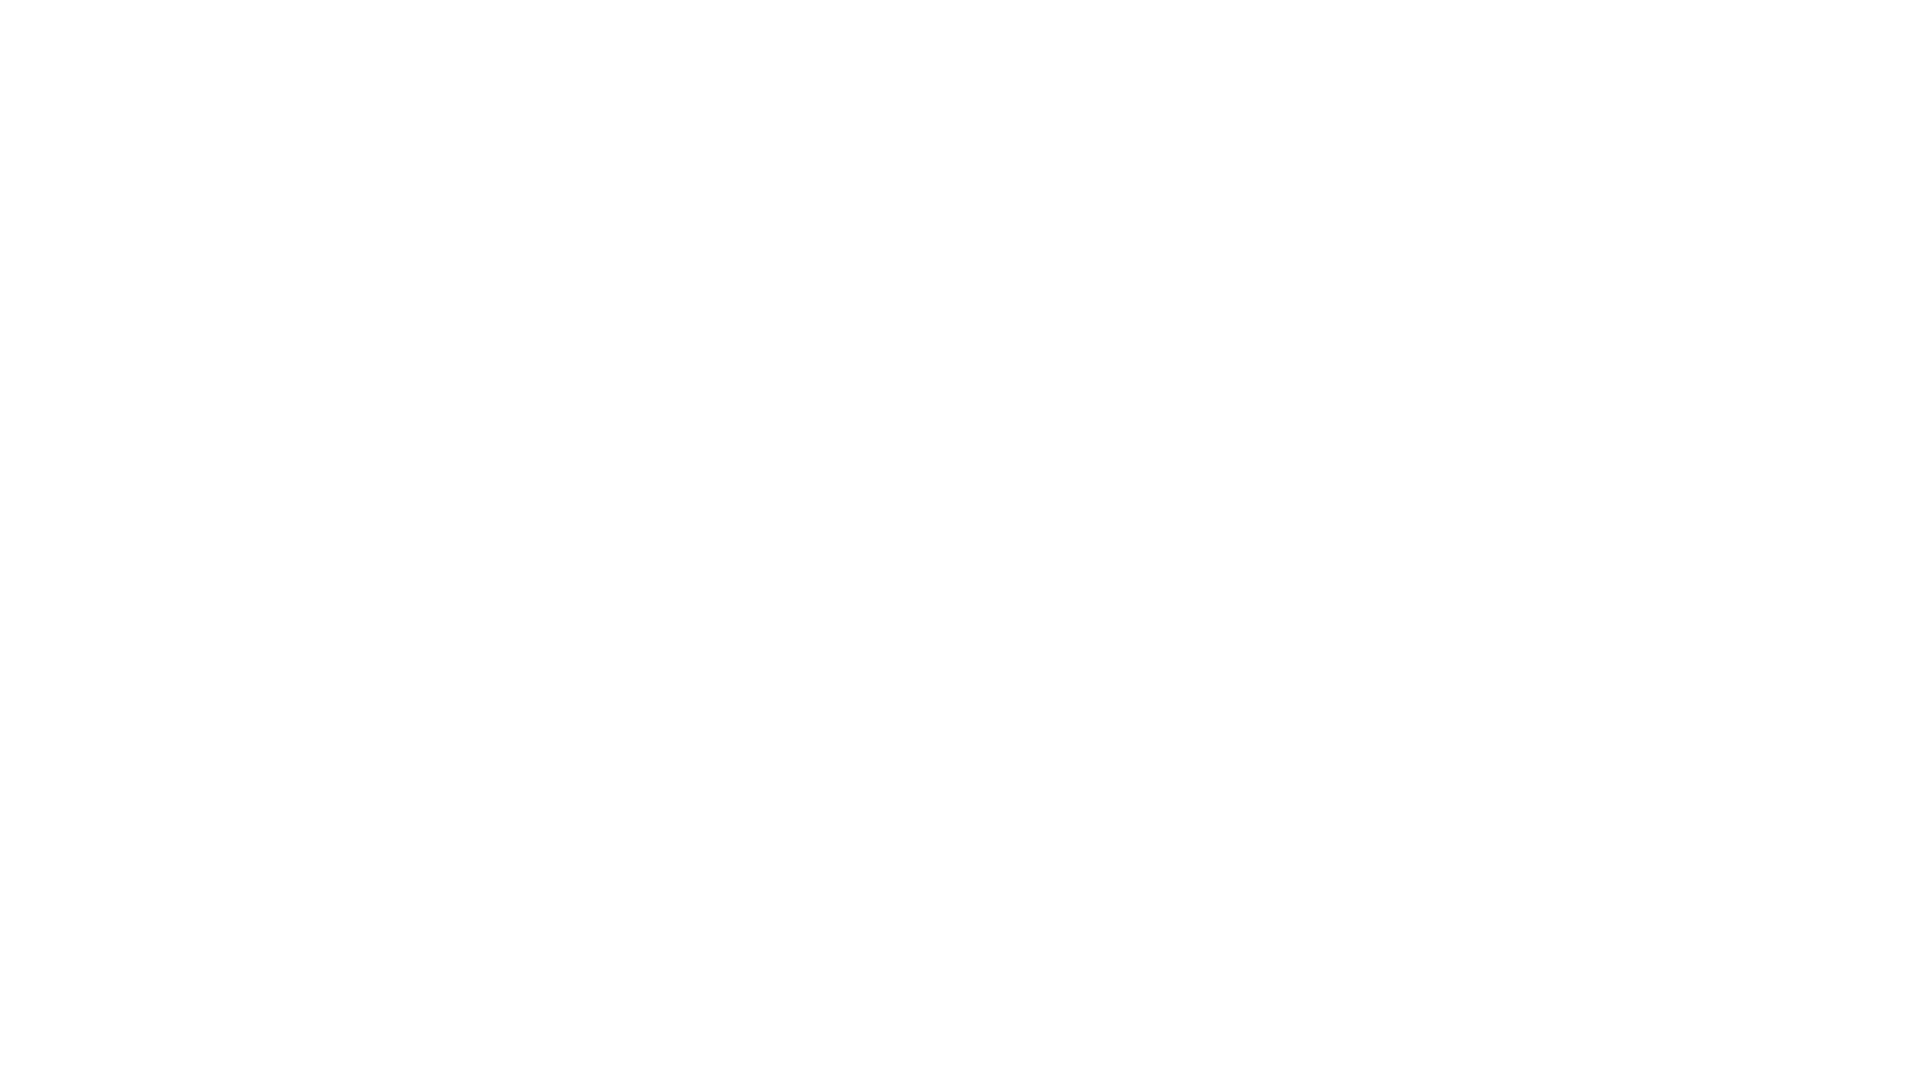 BFF2016_OFFICIALSELECTION_1920X1080_BLACK copy.png